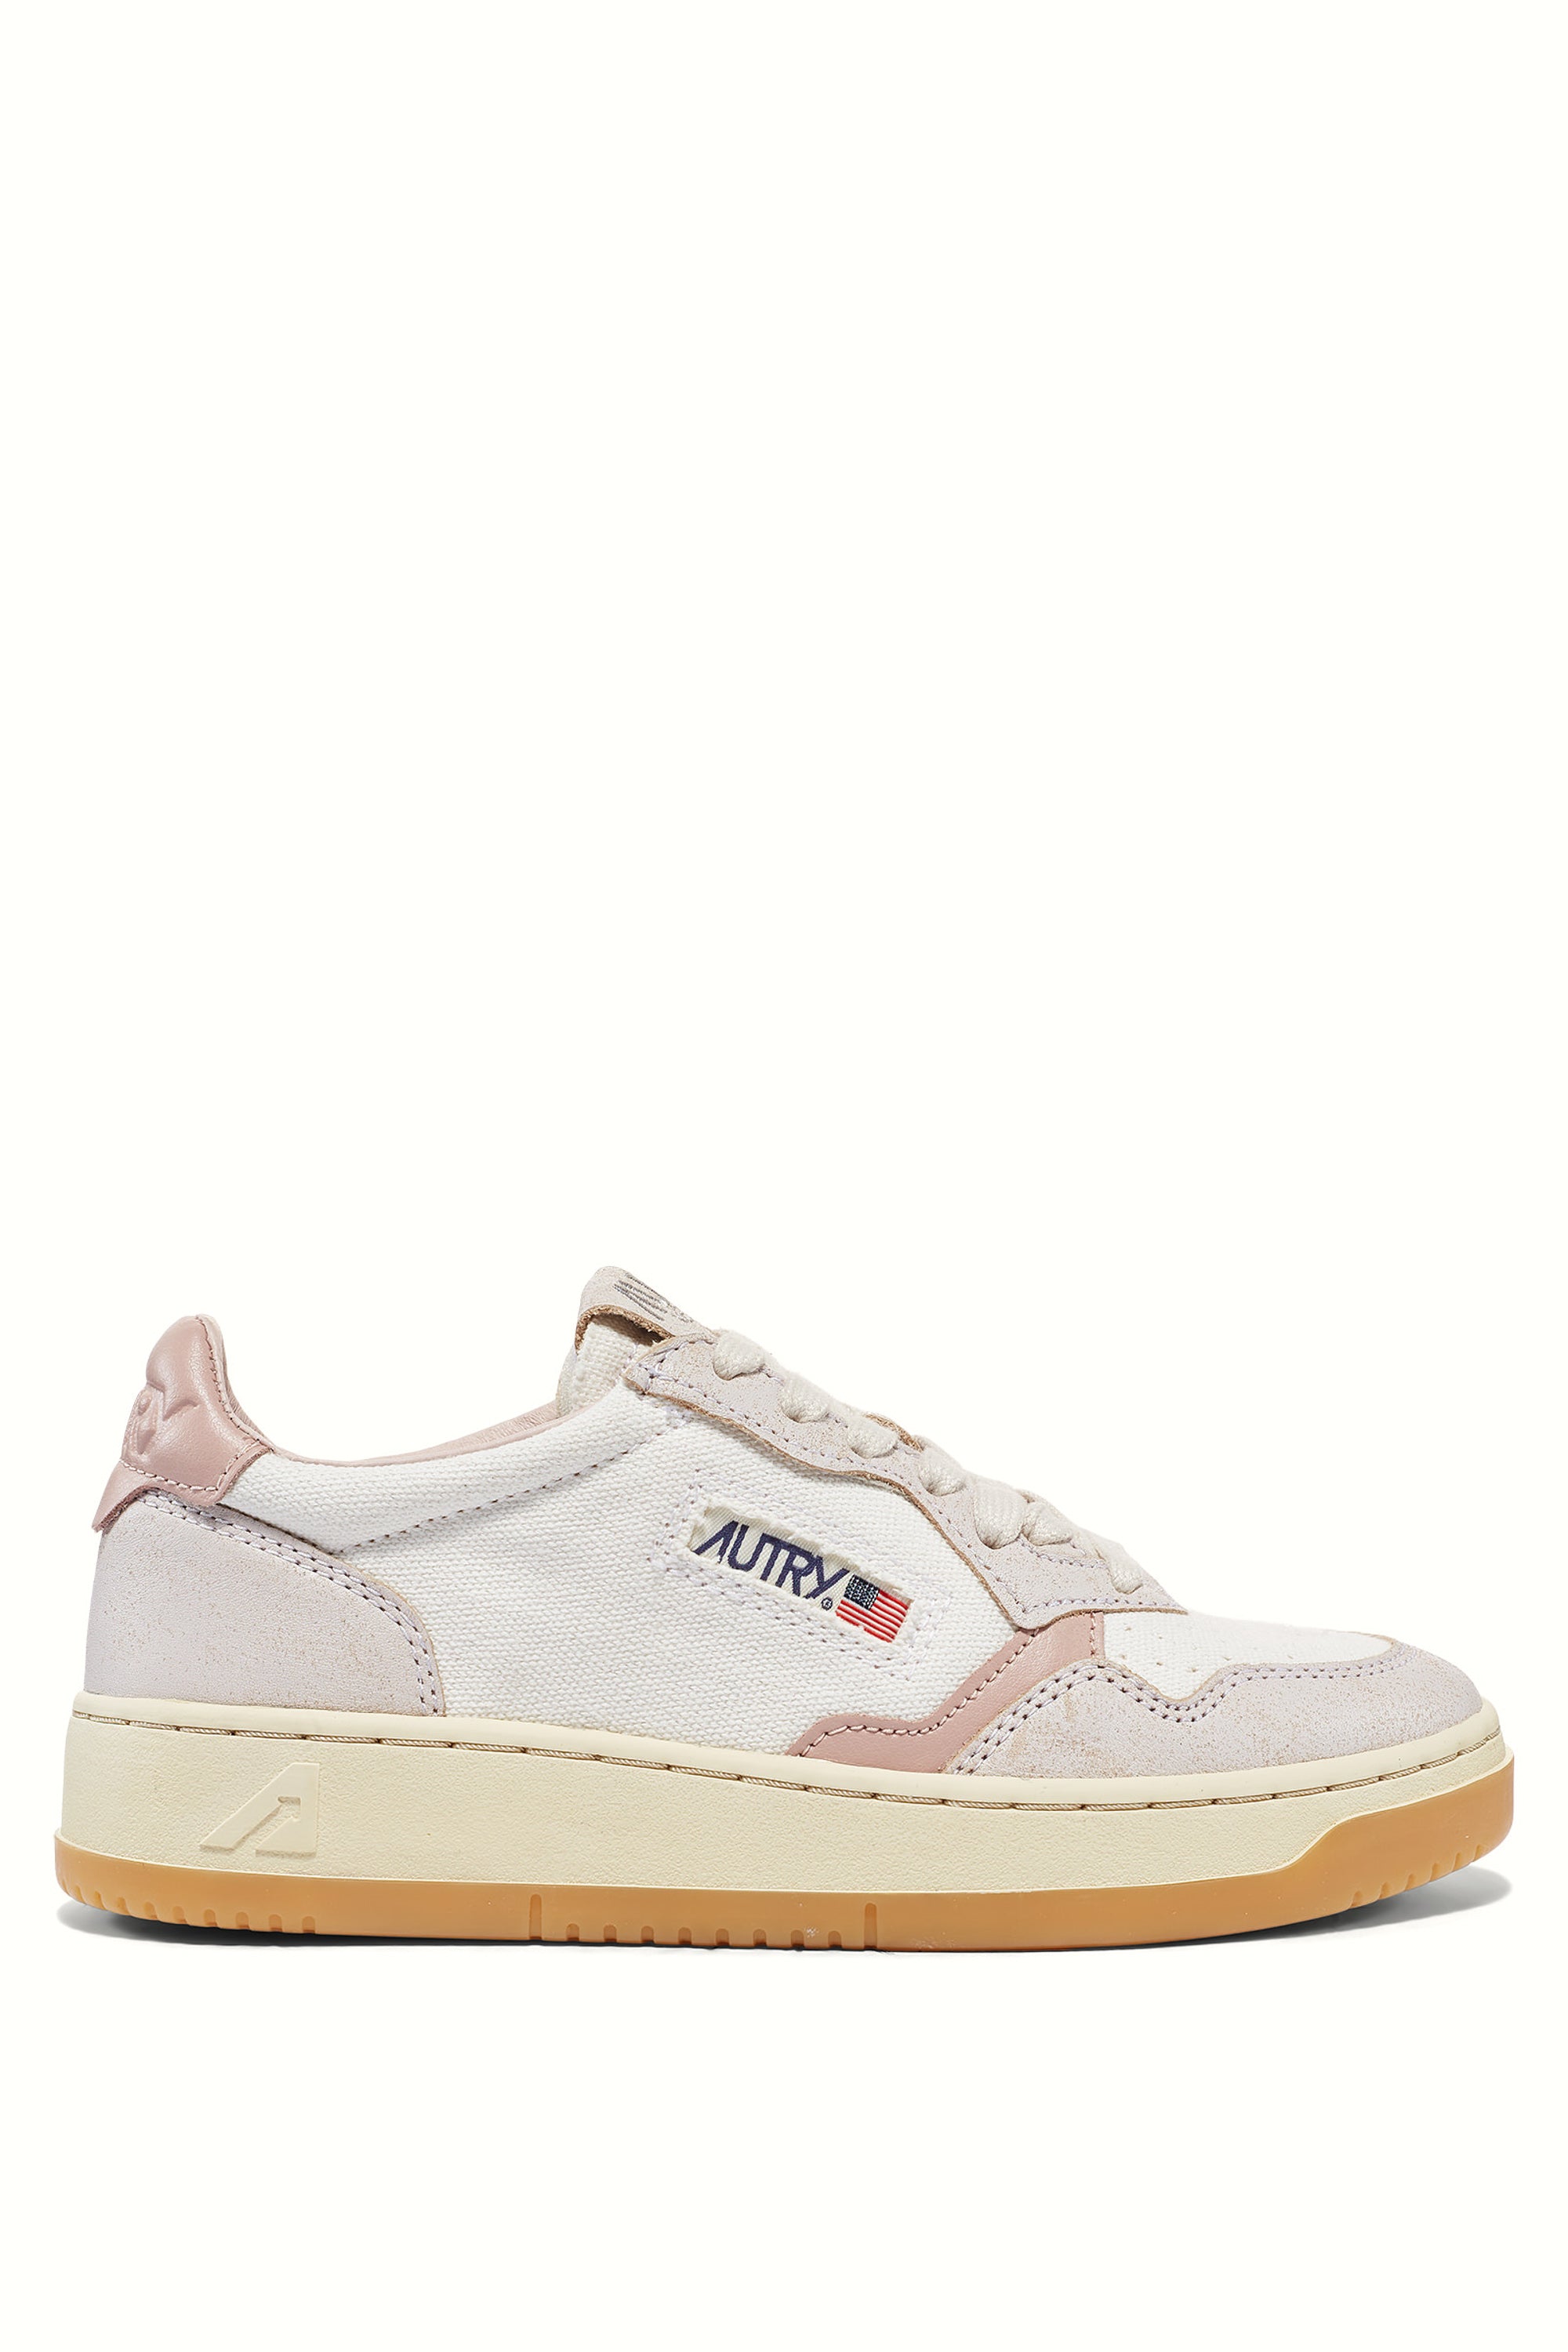 Medalist bi-material women's sneaker in canvas and leather